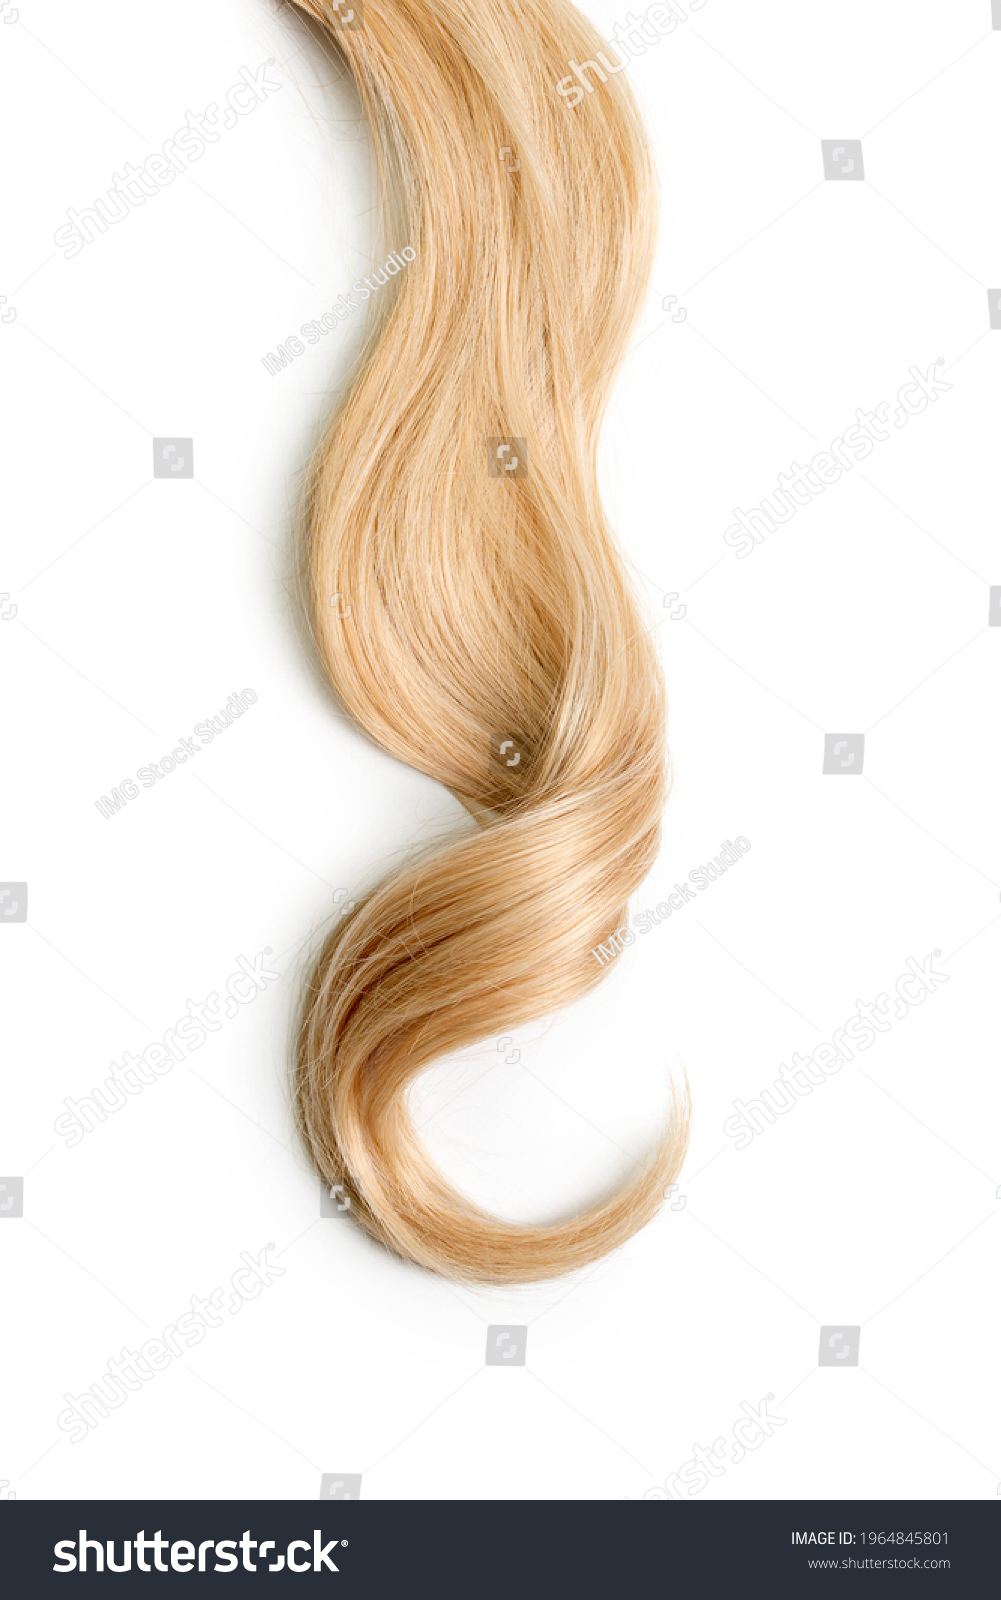 Curly blonde hair isolated on white background. Beautiful healthy long blond hair lock, haircut, hairstyle. Dyed hair or coloring, hair extension, cure, treatment concept #1964845801